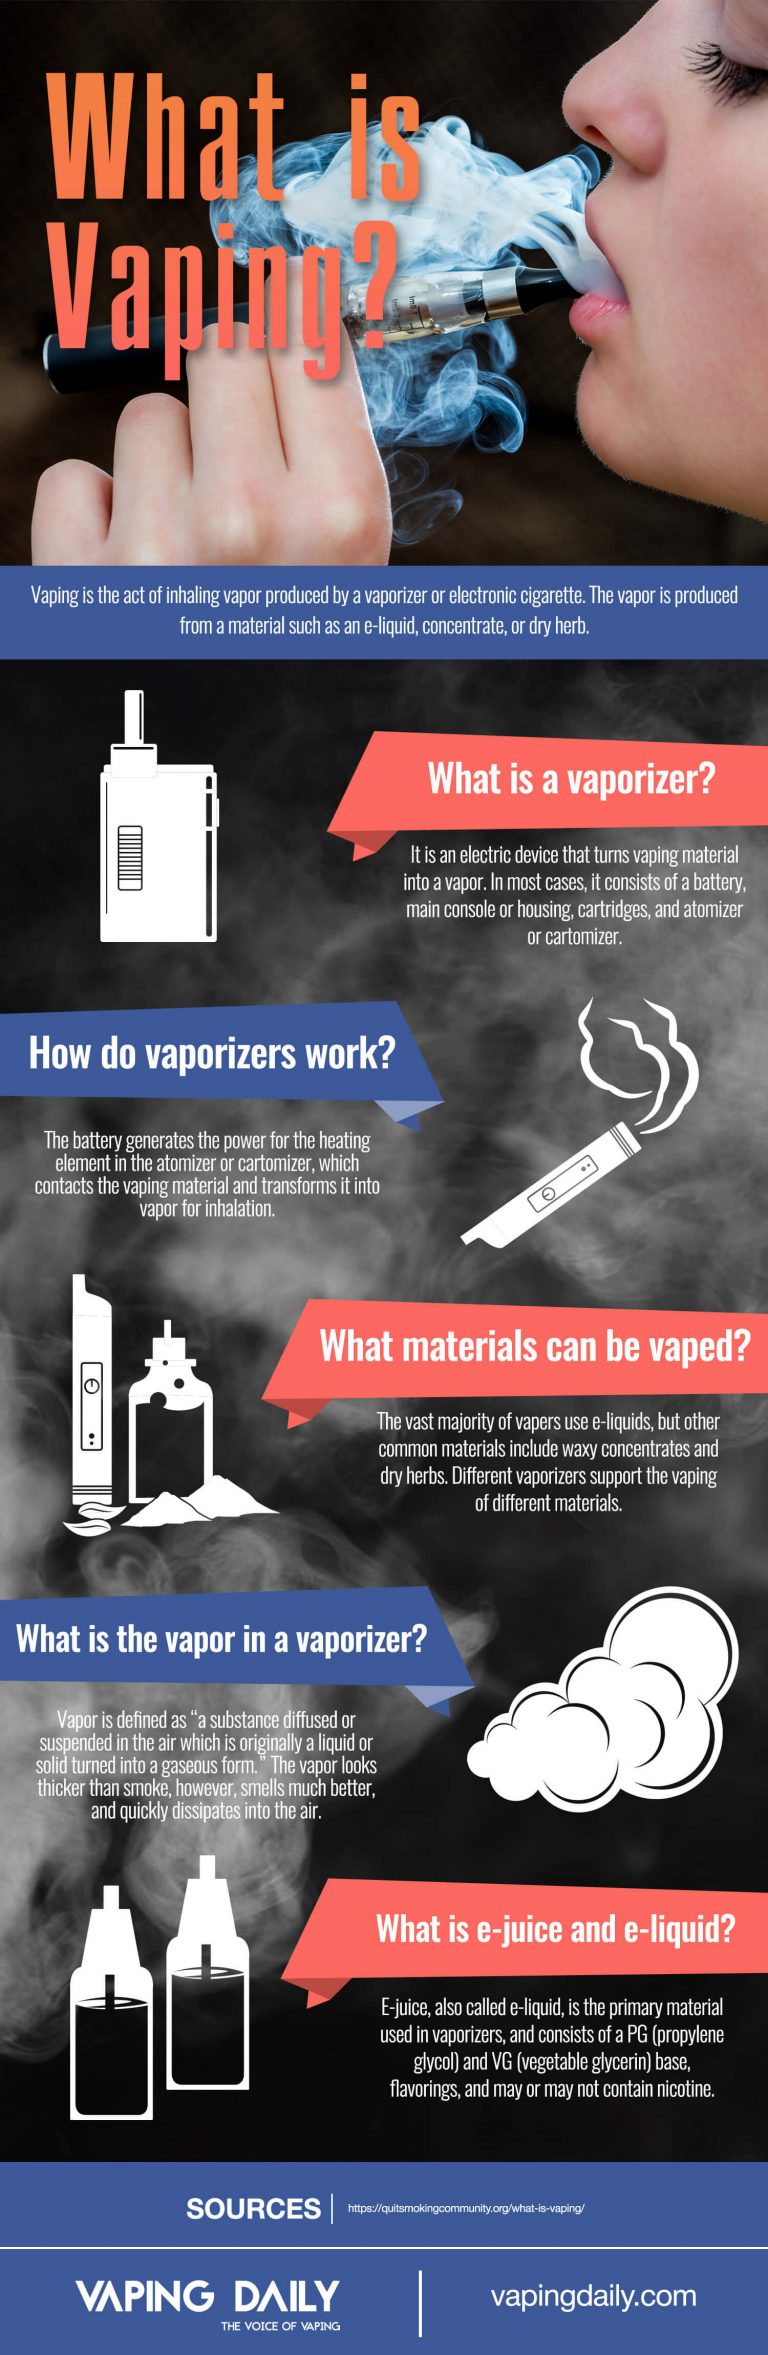 research on vaping